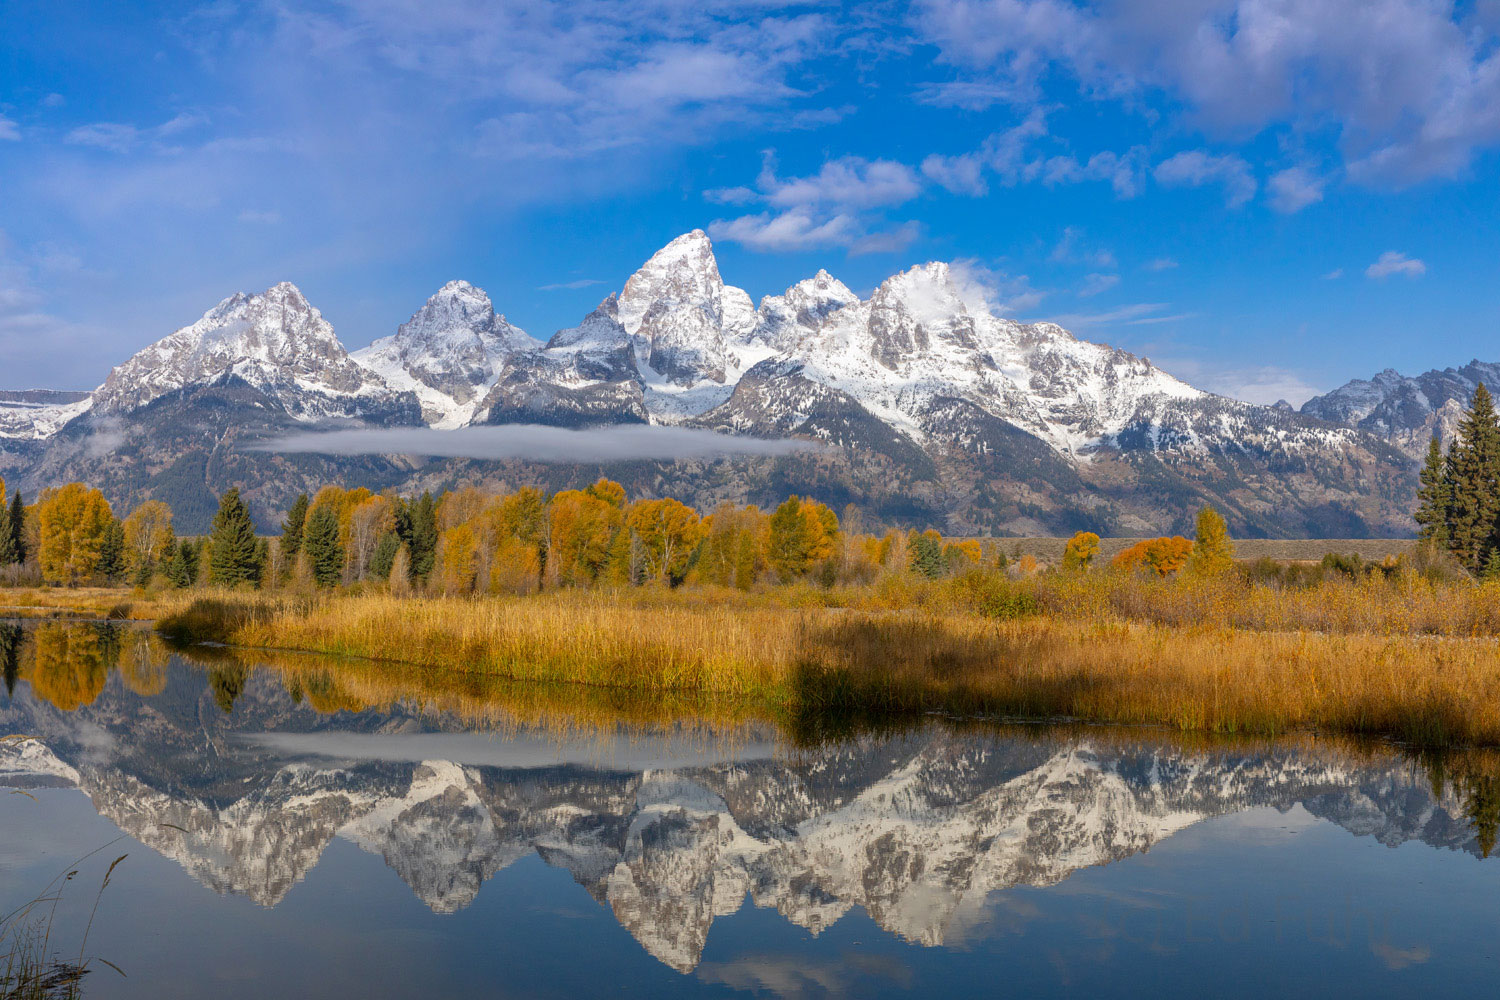 The Teton range, coated in a fresh snow, and the nearby aspen reflect in the still waters near Schwabacher's Landing.